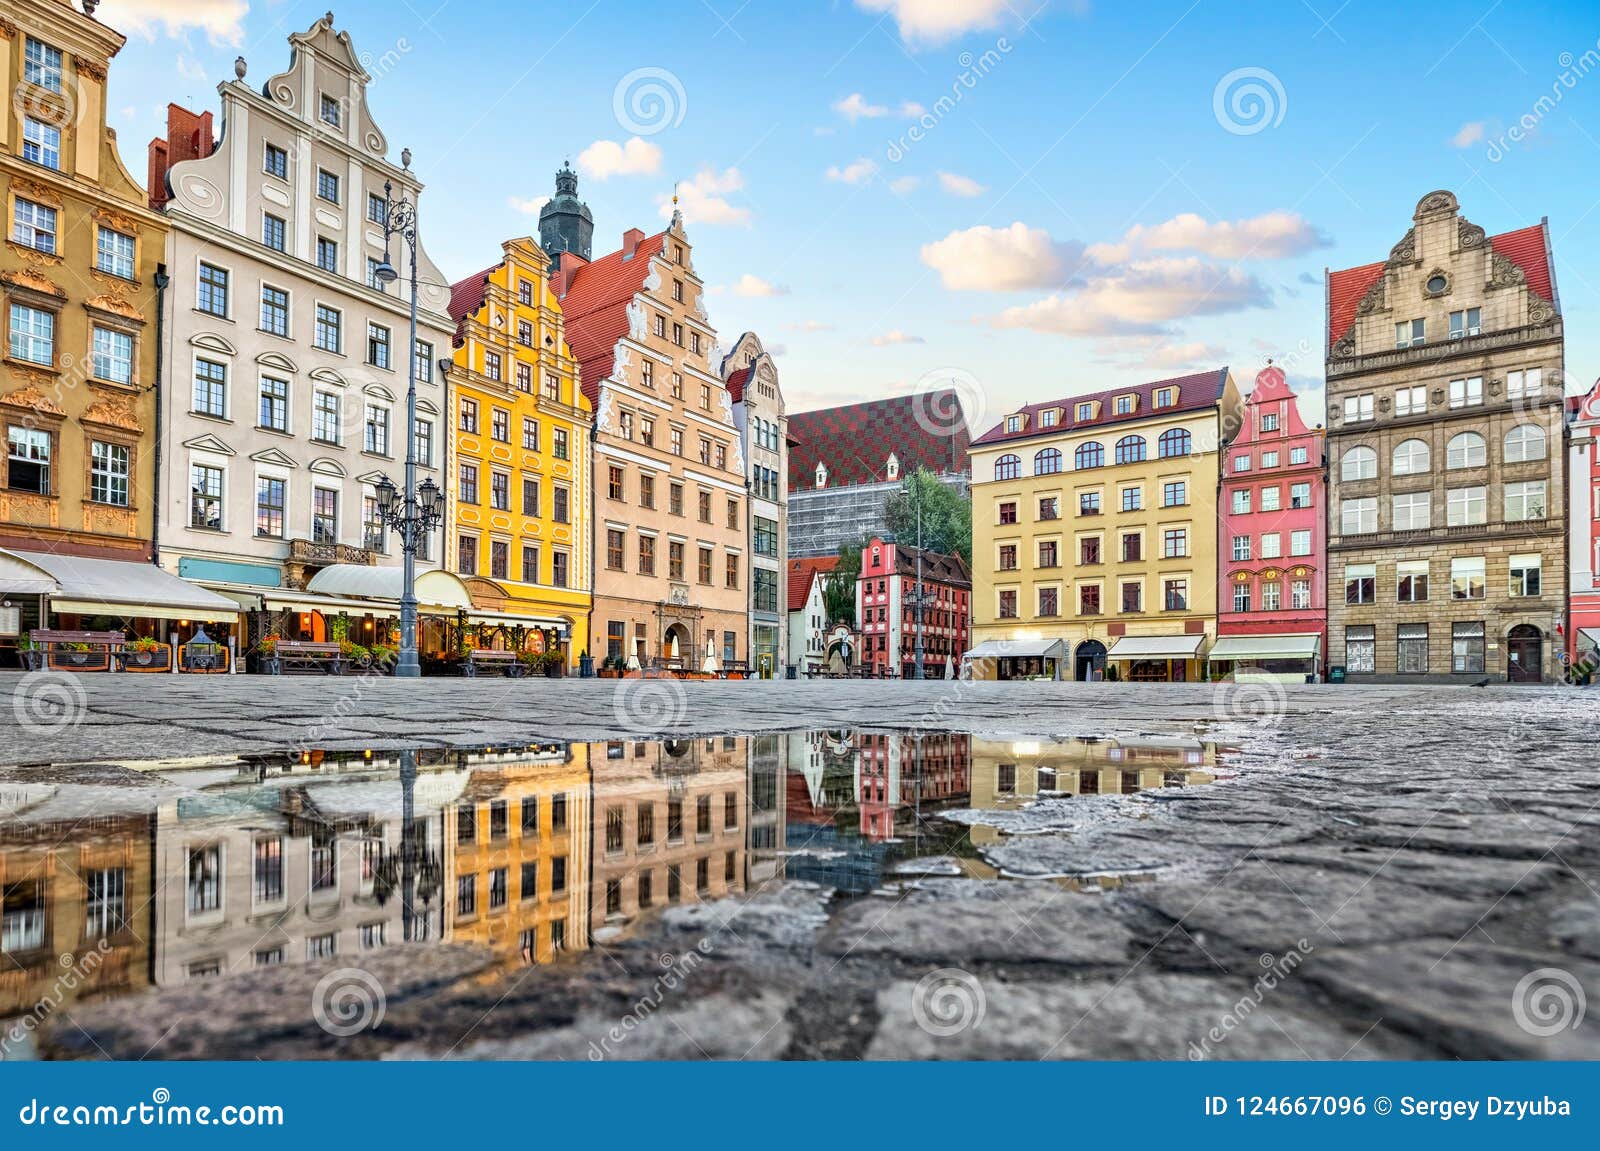 colorful buildings reflecting in a puddle on rynek square in wroclaw